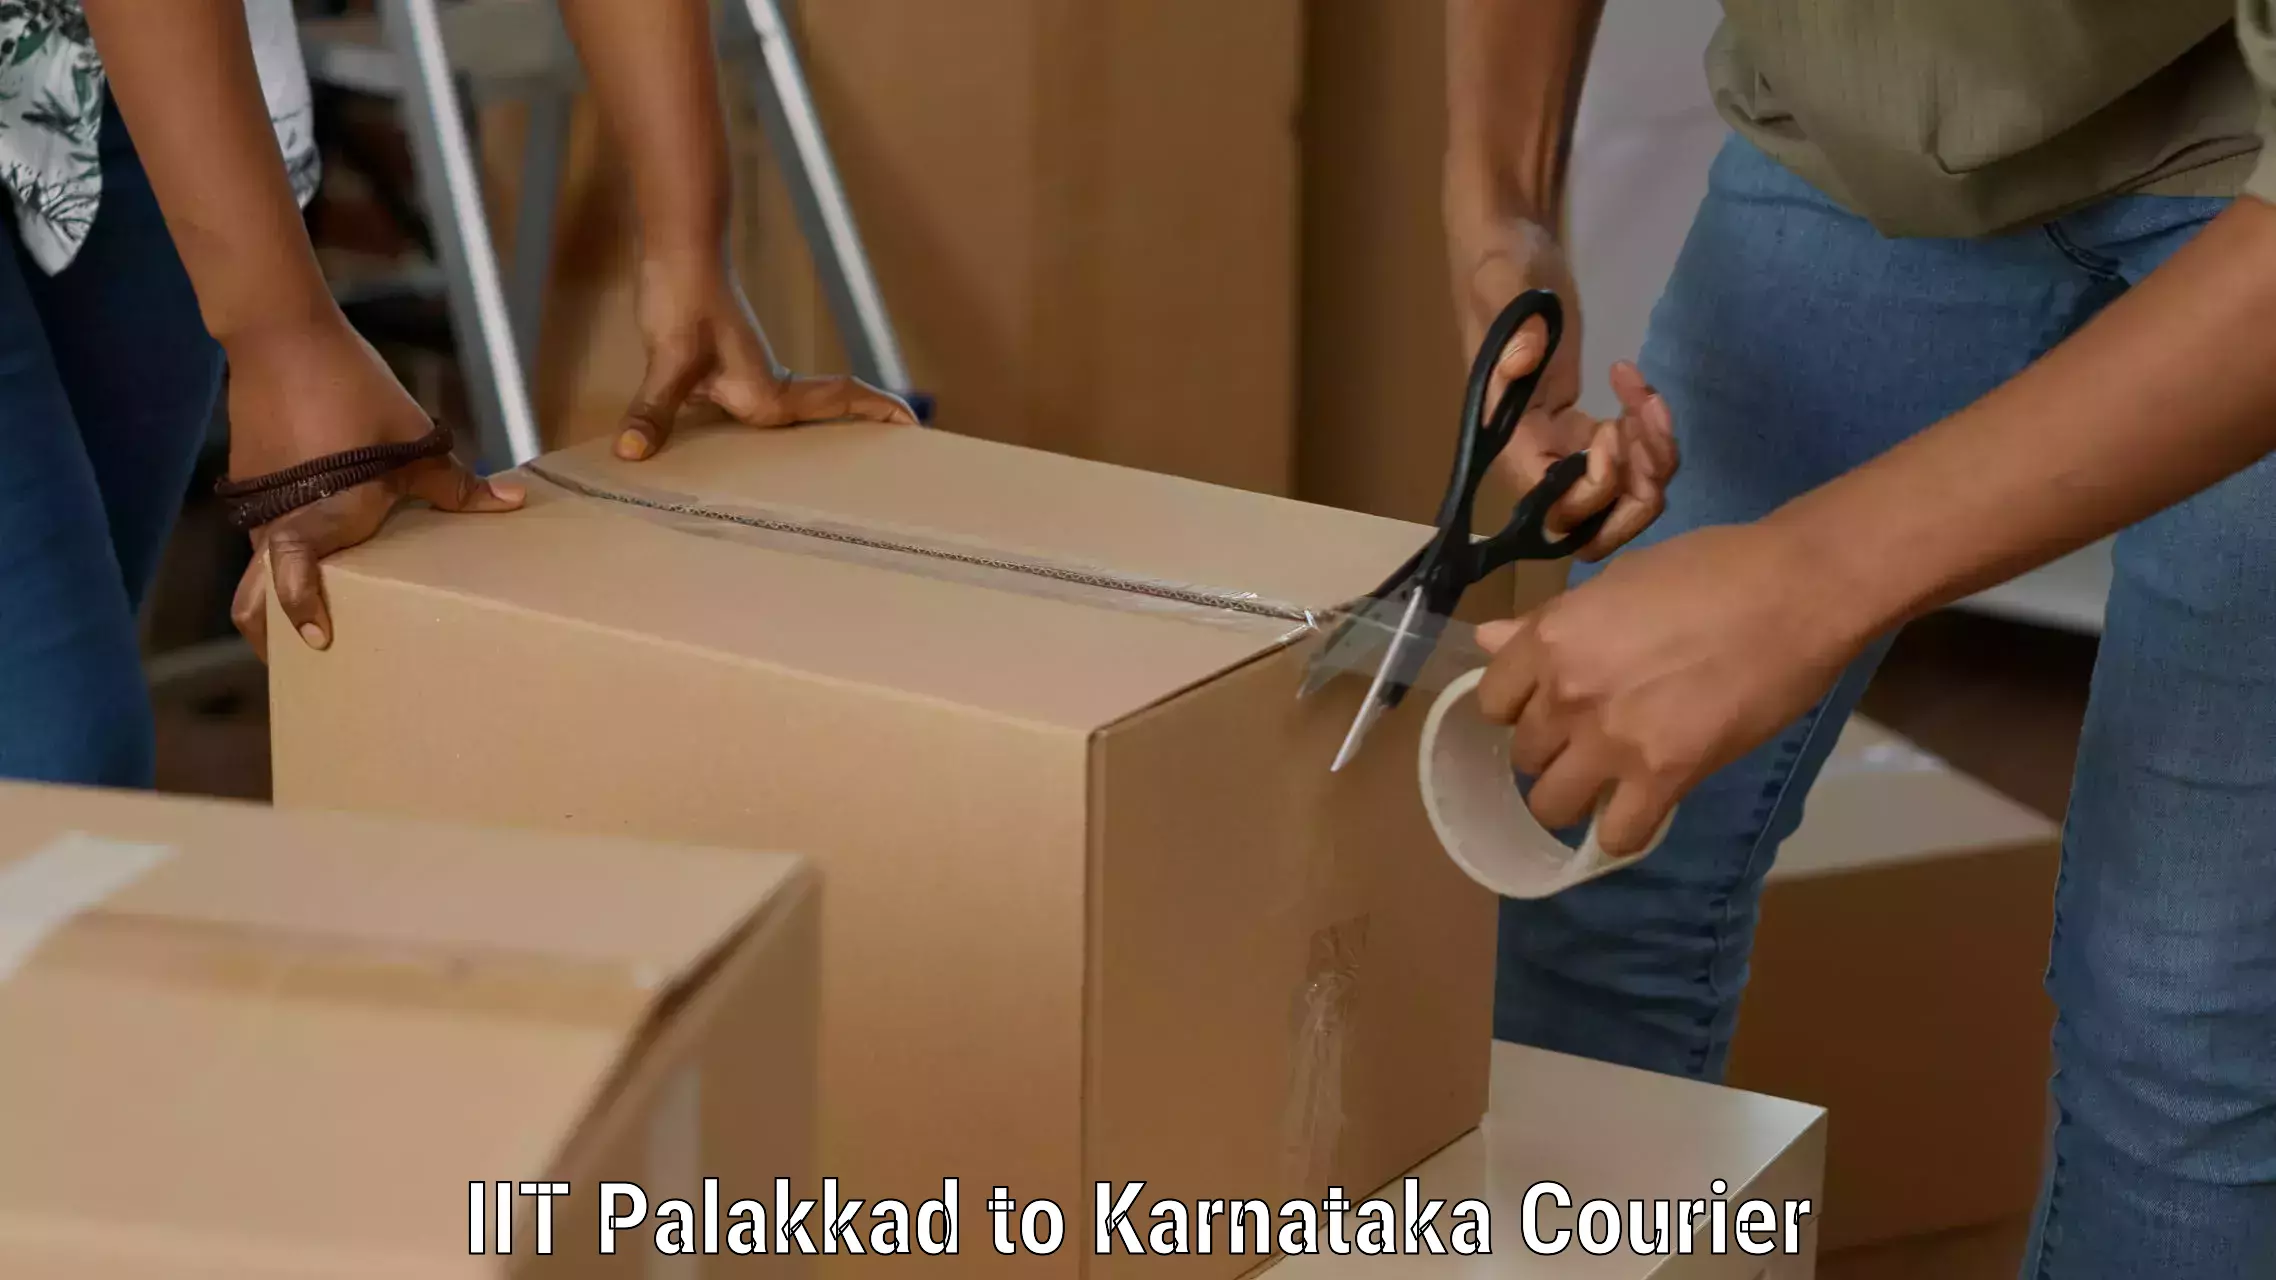 Customer-friendly courier services IIT Palakkad to Bangalore